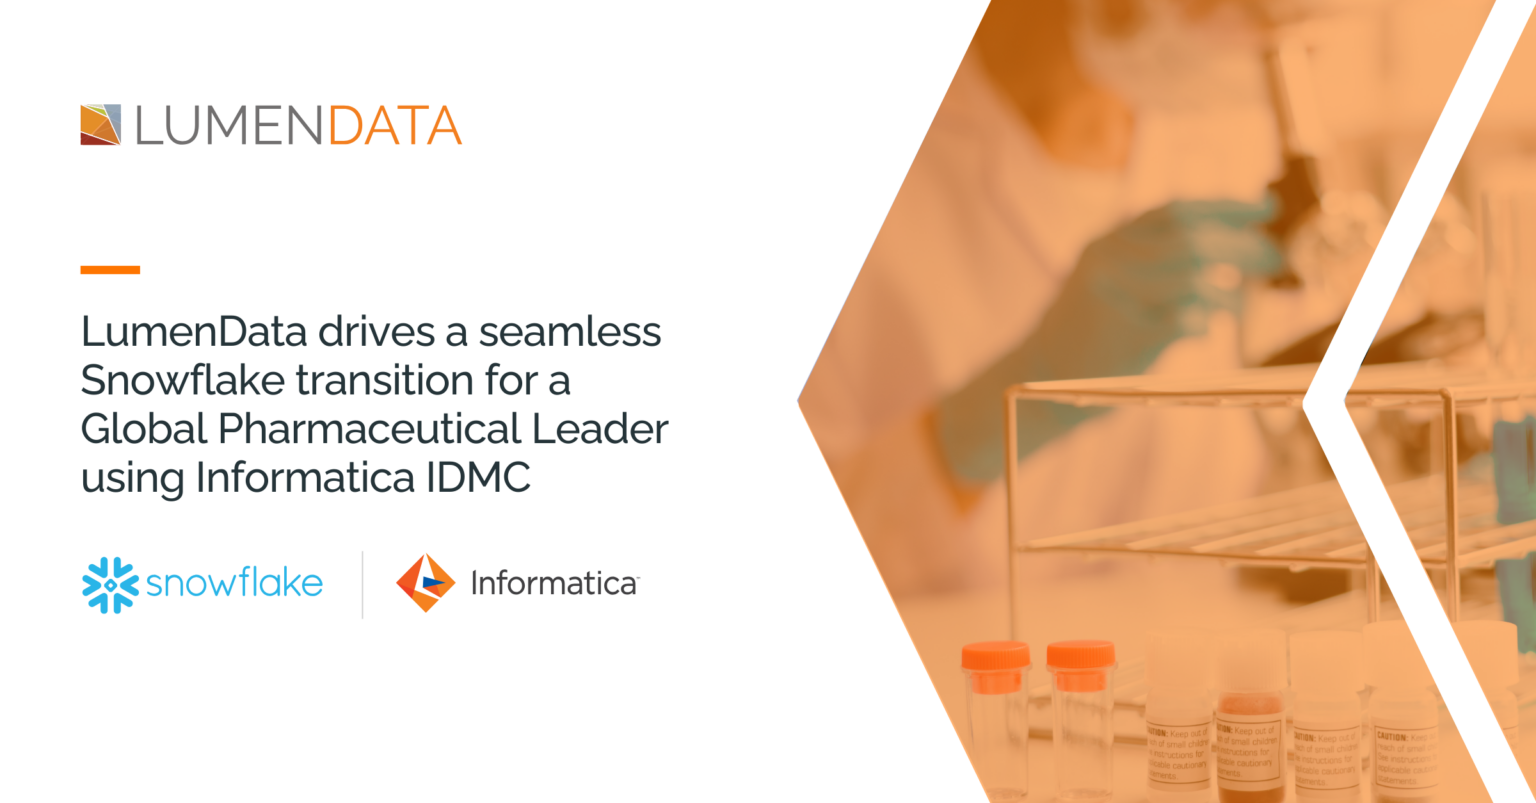 Leveraging Informatica IDMC for a seamless Snowflake transition